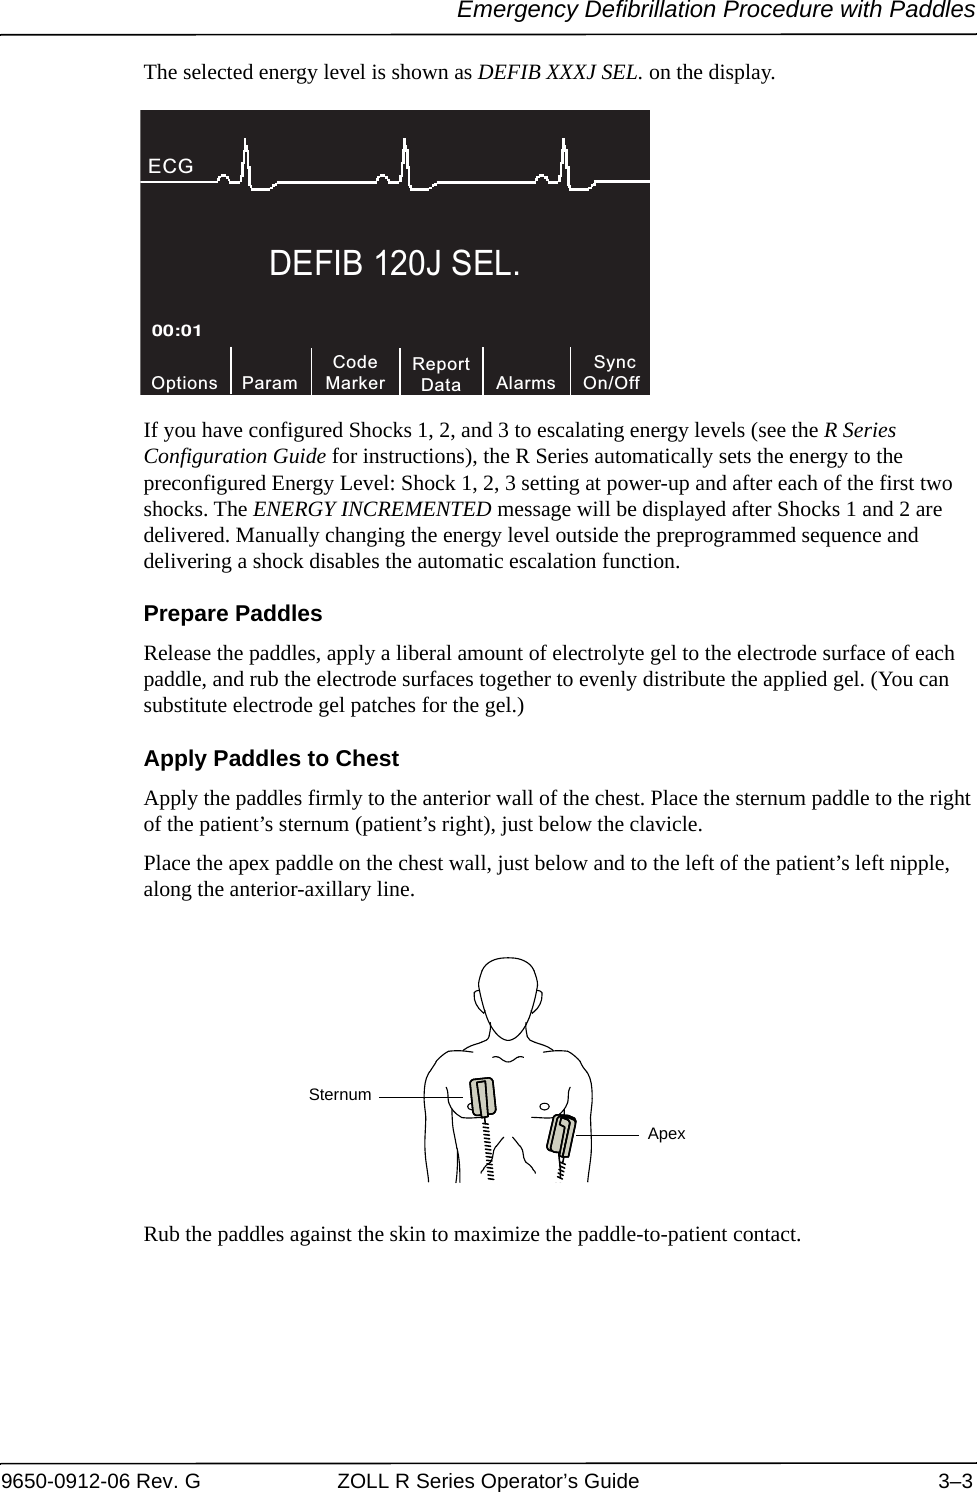 Emergency Defibrillation Procedure with Paddles9650-0912-06 Rev. G ZOLL R Series Operator’s Guide 3–3The selected energy level is shown as DEFIB XXXJ SEL. on the display.If you have configured Shocks 1, 2, and 3 to escalating energy levels (see the R Series Configuration Guide for instructions), the R Series automatically sets the energy to the preconfigured Energy Level: Shock 1, 2, 3 setting at power-up and after each of the first two shocks. The ENERGY INCREMENTED message will be displayed after Shocks 1 and 2 are delivered. Manually changing the energy level outside the preprogrammed sequence and delivering a shock disables the automatic escalation function.Prepare PaddlesRelease the paddles, apply a liberal amount of electrolyte gel to the electrode surface of each paddle, and rub the electrode surfaces together to evenly distribute the applied gel. (You can substitute electrode gel patches for the gel.)Apply Paddles to ChestApply the paddles firmly to the anterior wall of the chest. Place the sternum paddle to the right of the patient’s sternum (patient’s right), just below the clavicle.Place the apex paddle on the chest wall, just below and to the left of the patient’s left nipple, along the anterior-axillary line.Rub the paddles against the skin to maximize the paddle-to-patient contact.DEFIB 120J SEL.CodeMarkerOptions00:01ECG ParamReportData SyncOn/OffAlarmsSternumApex